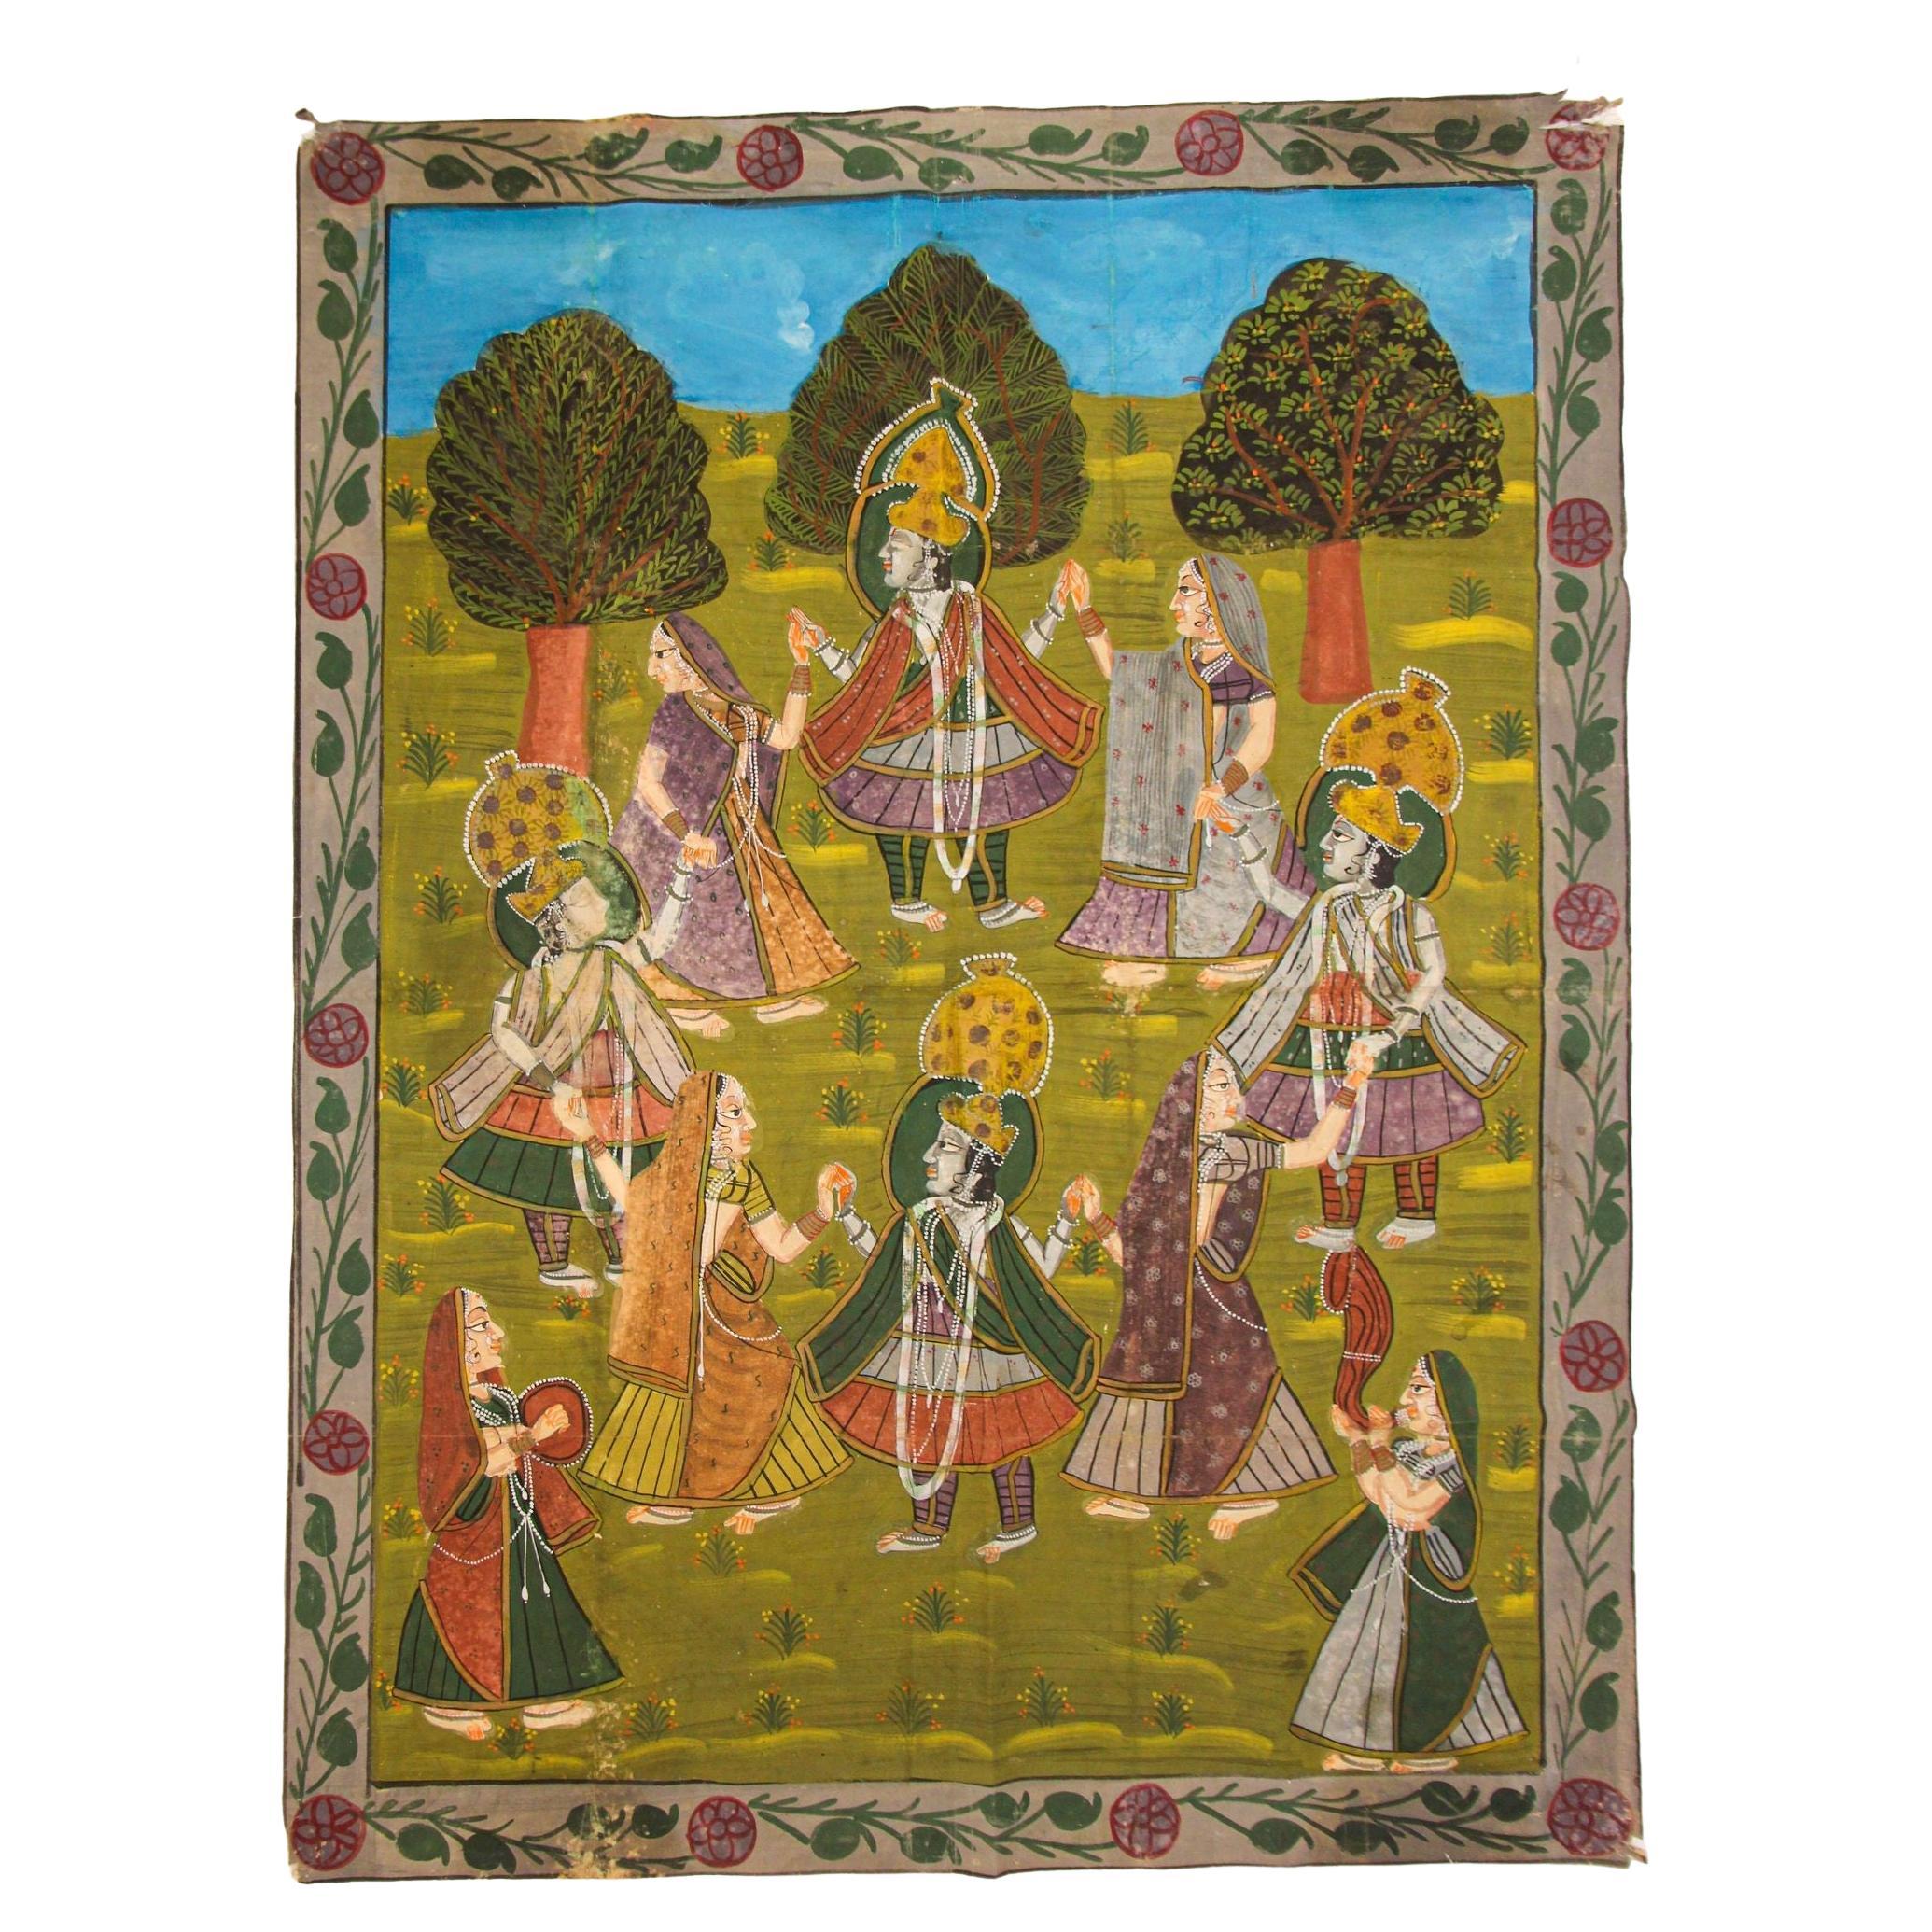 Vintage Pichhavai Painting of Krishna with Female Gopis Dancing